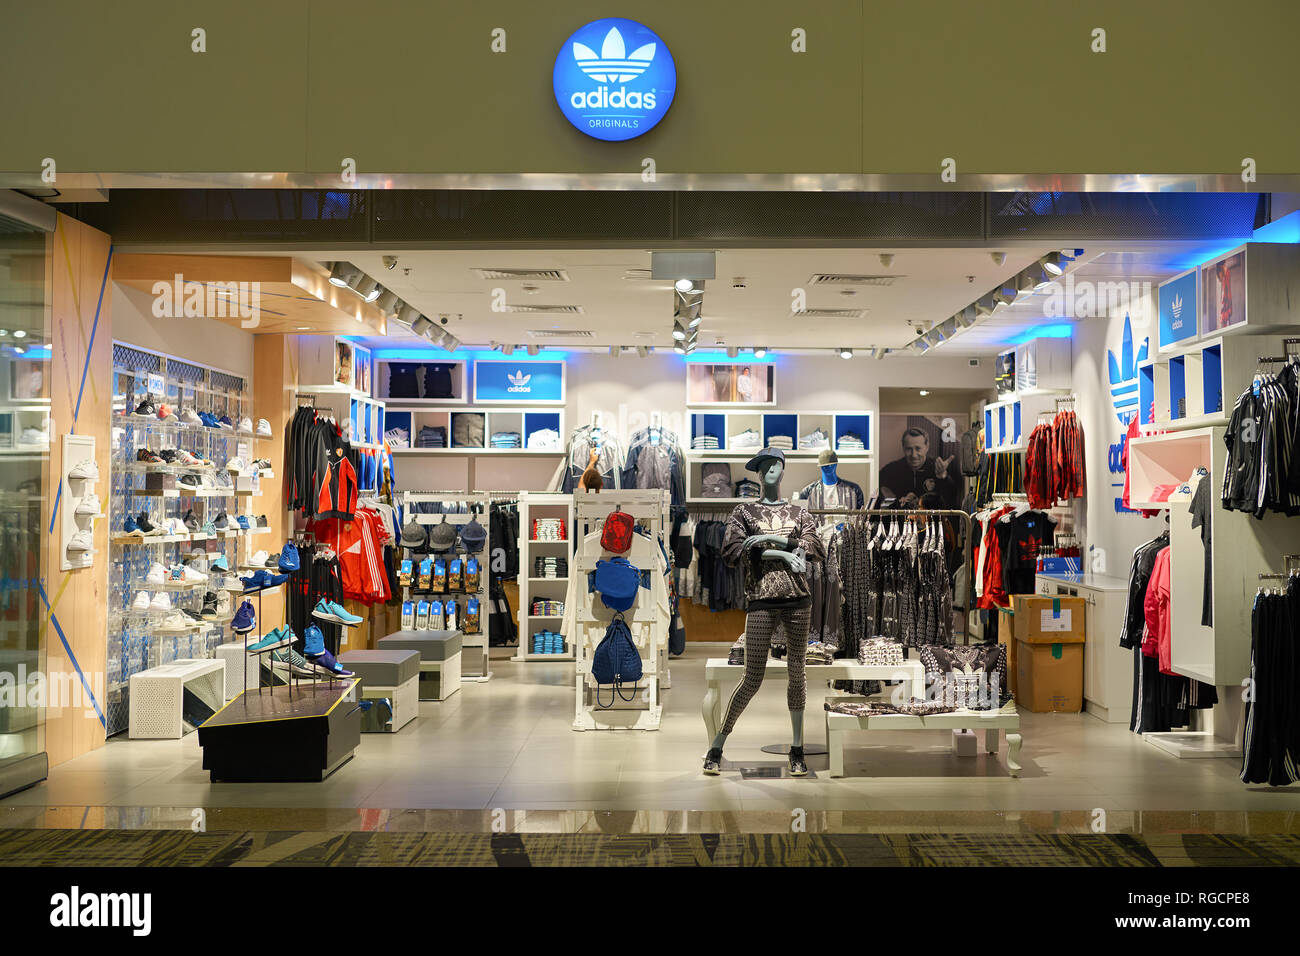 SINGAPORE - CIRCA SEPTEMBER, 2016: Adidas store at Singapore Changi Airport.  Changi Airport is one of the largest transportation hubs in Southeast Asi  Stock Photo - Alamy